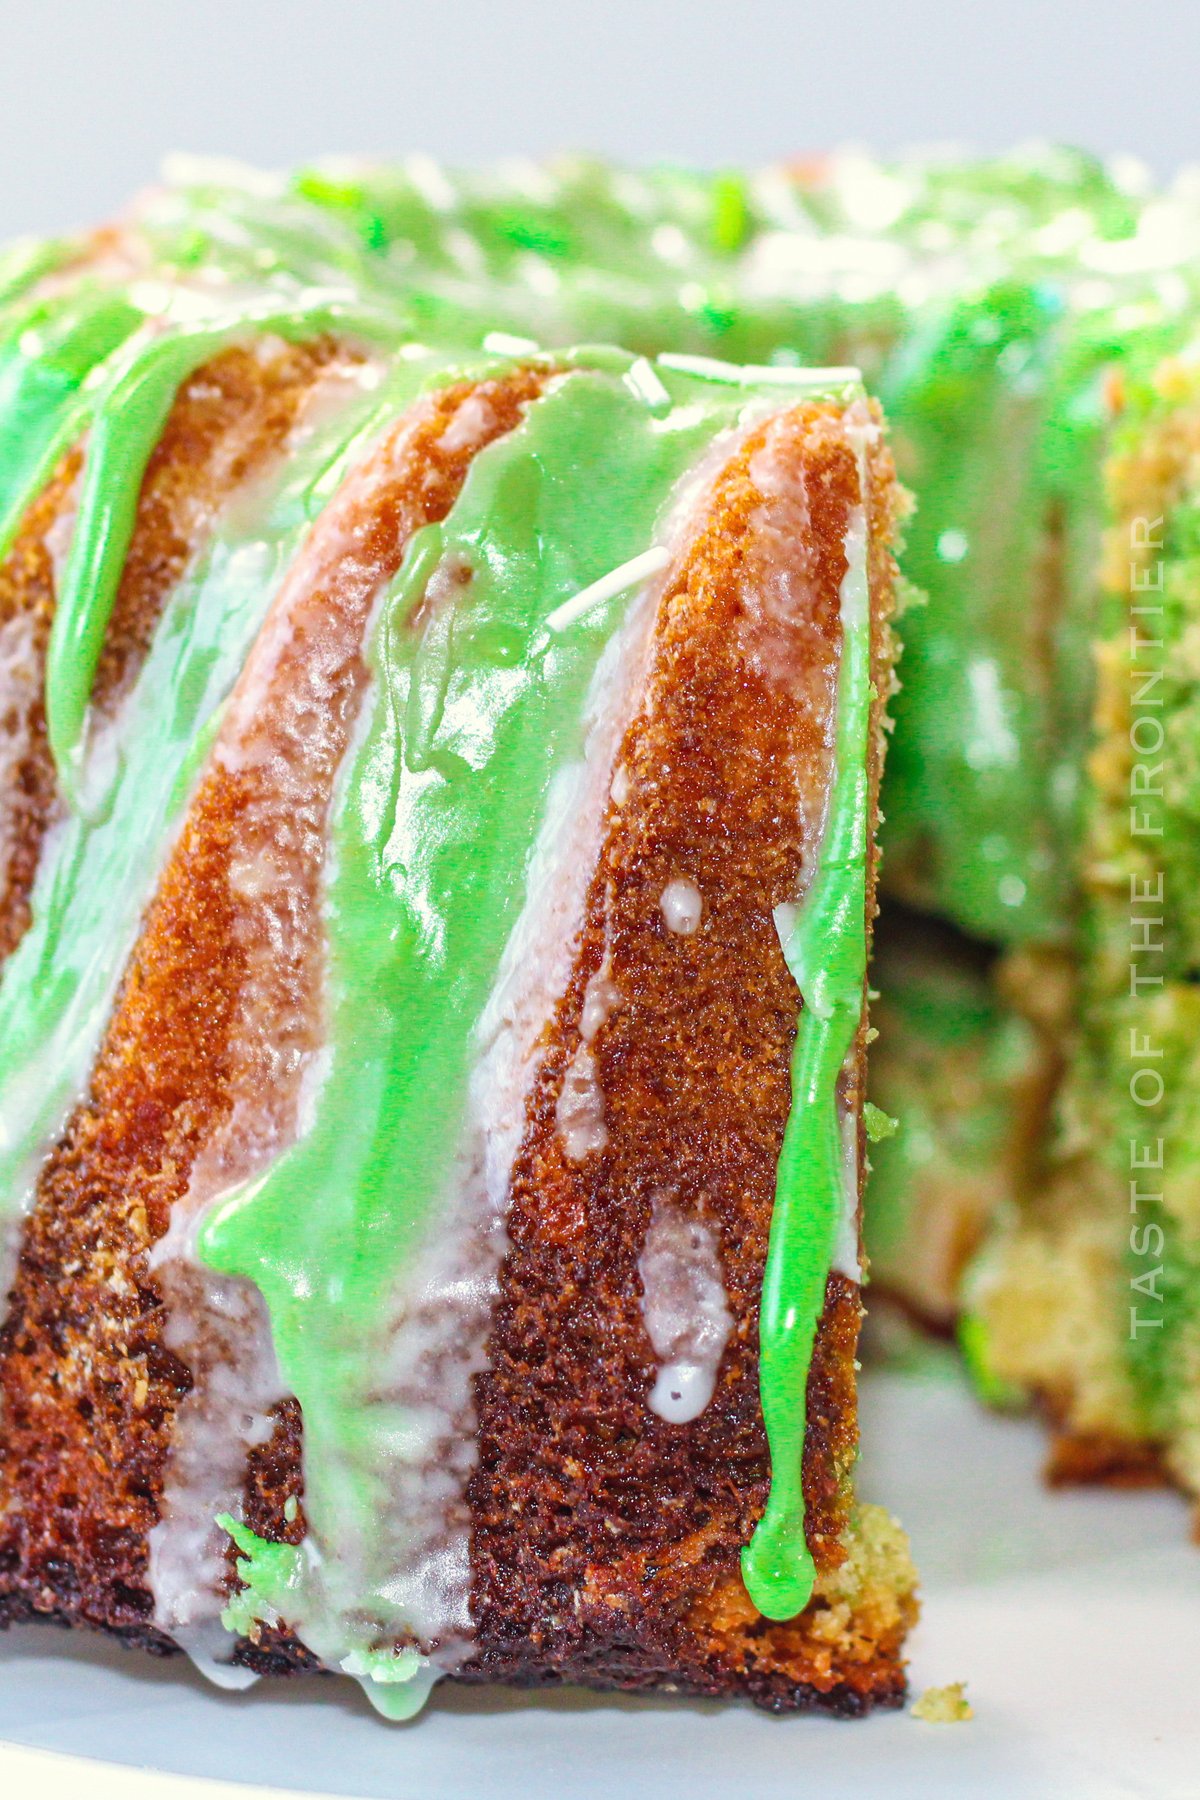 recipe for St. Patrick’s Day Cake